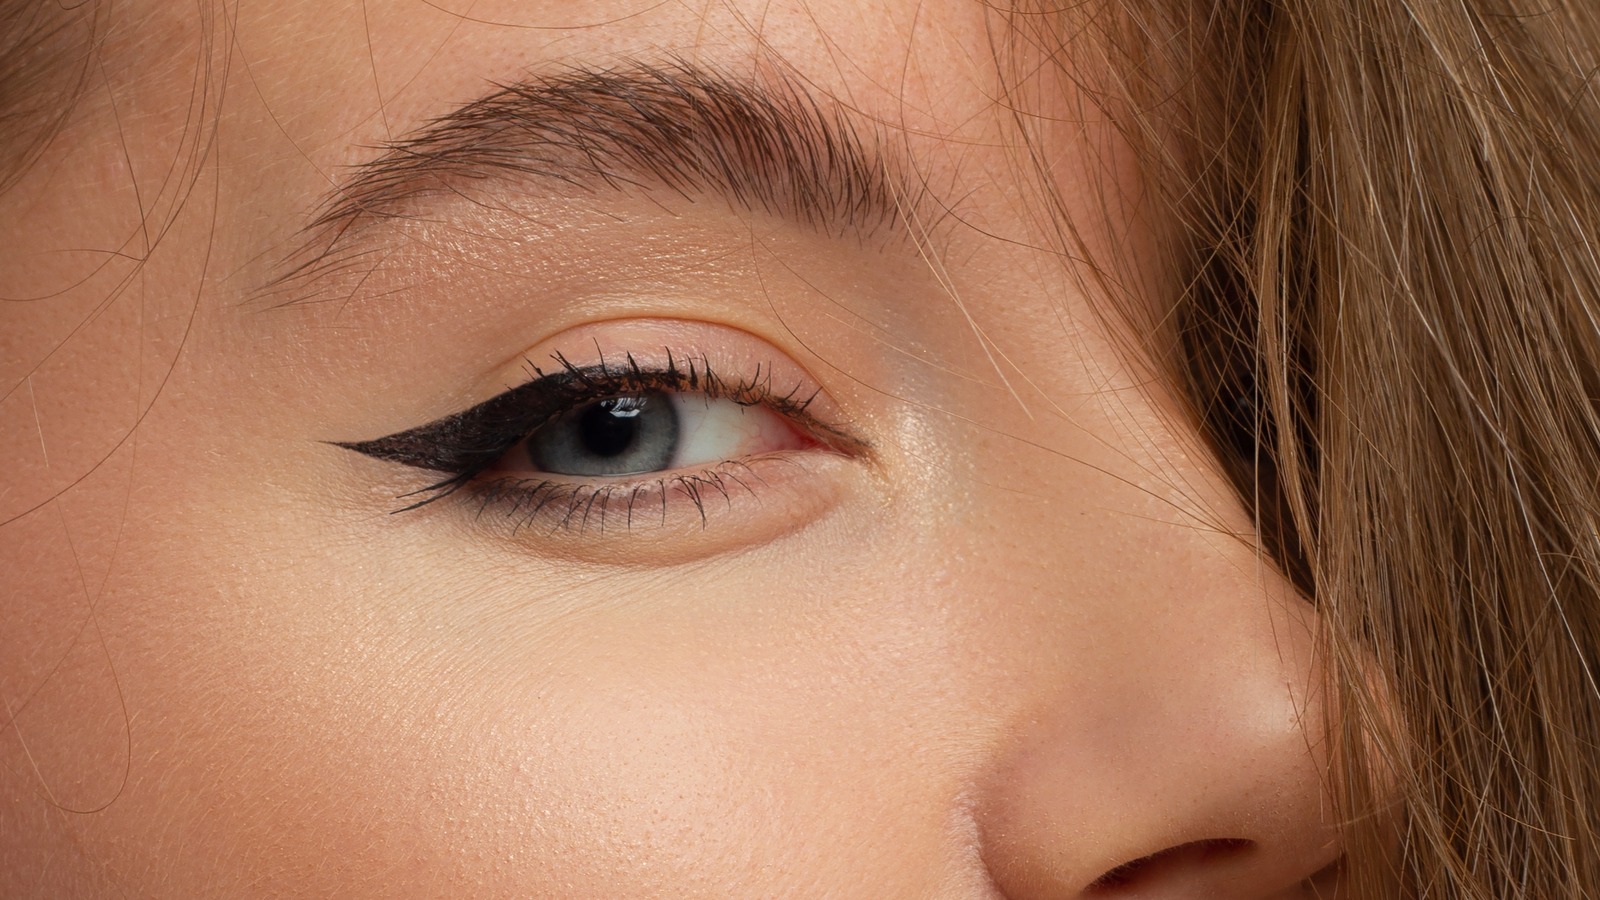 Makeup Artist @fulviafarolfi demonstrates a perfect wing with LE